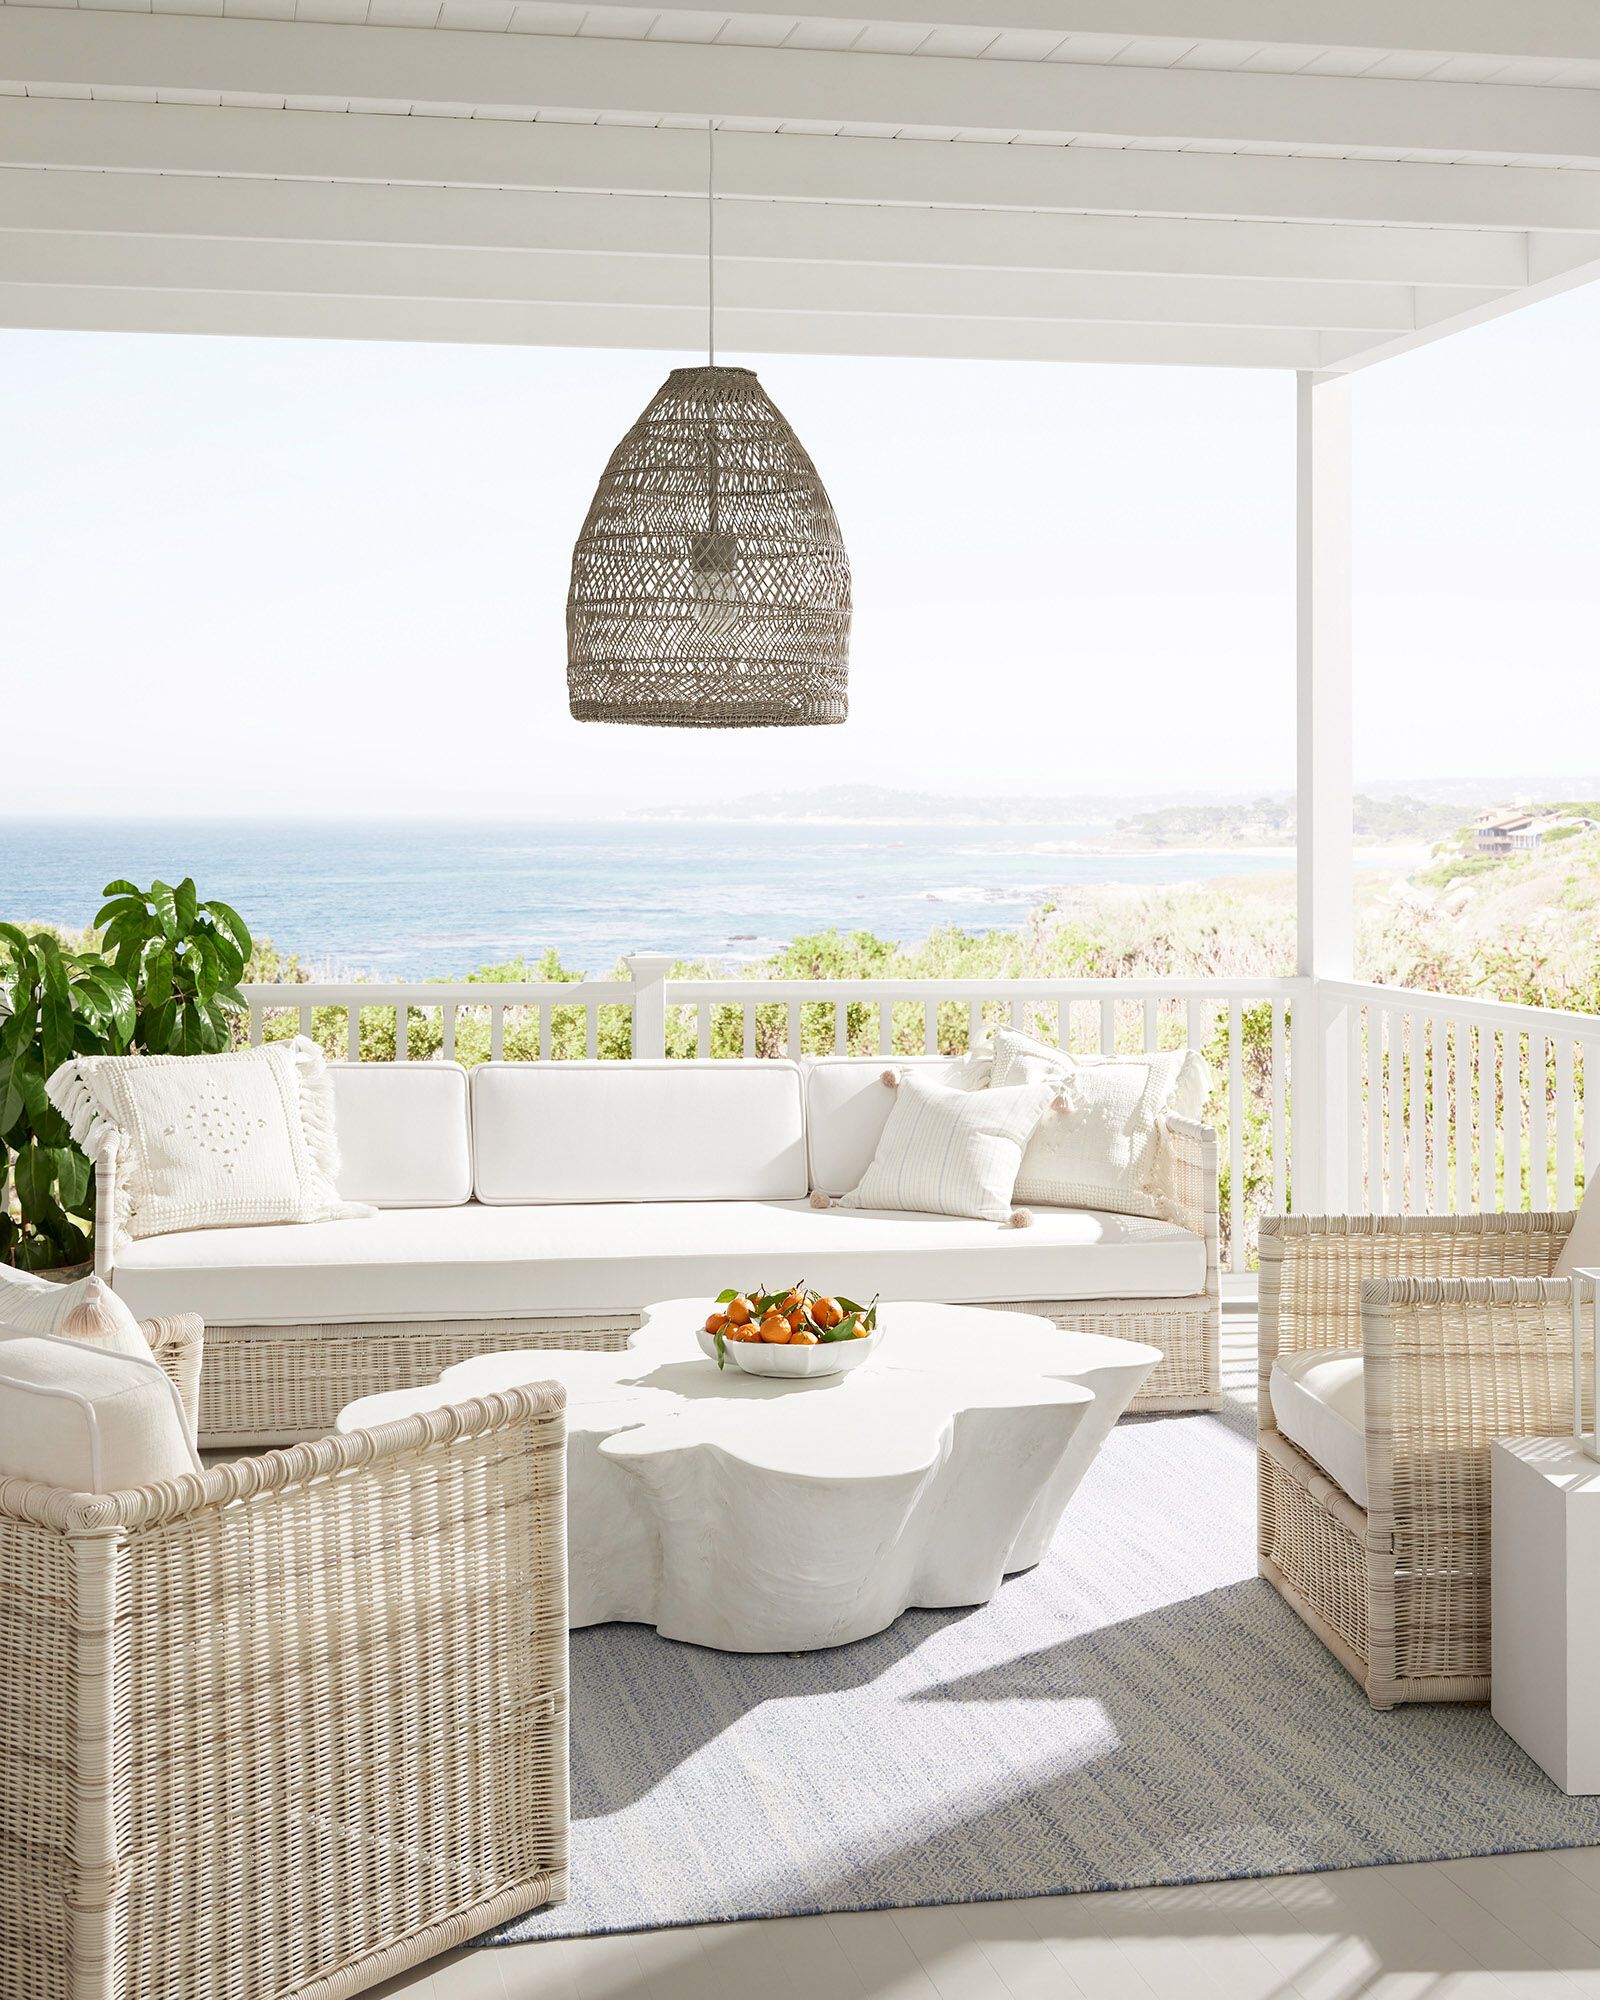 https://hips.hearstapps.com/hmg-prod/images/outdoor-living-room-pacifica-sofa-chair-x0211-1675092617.jpeg